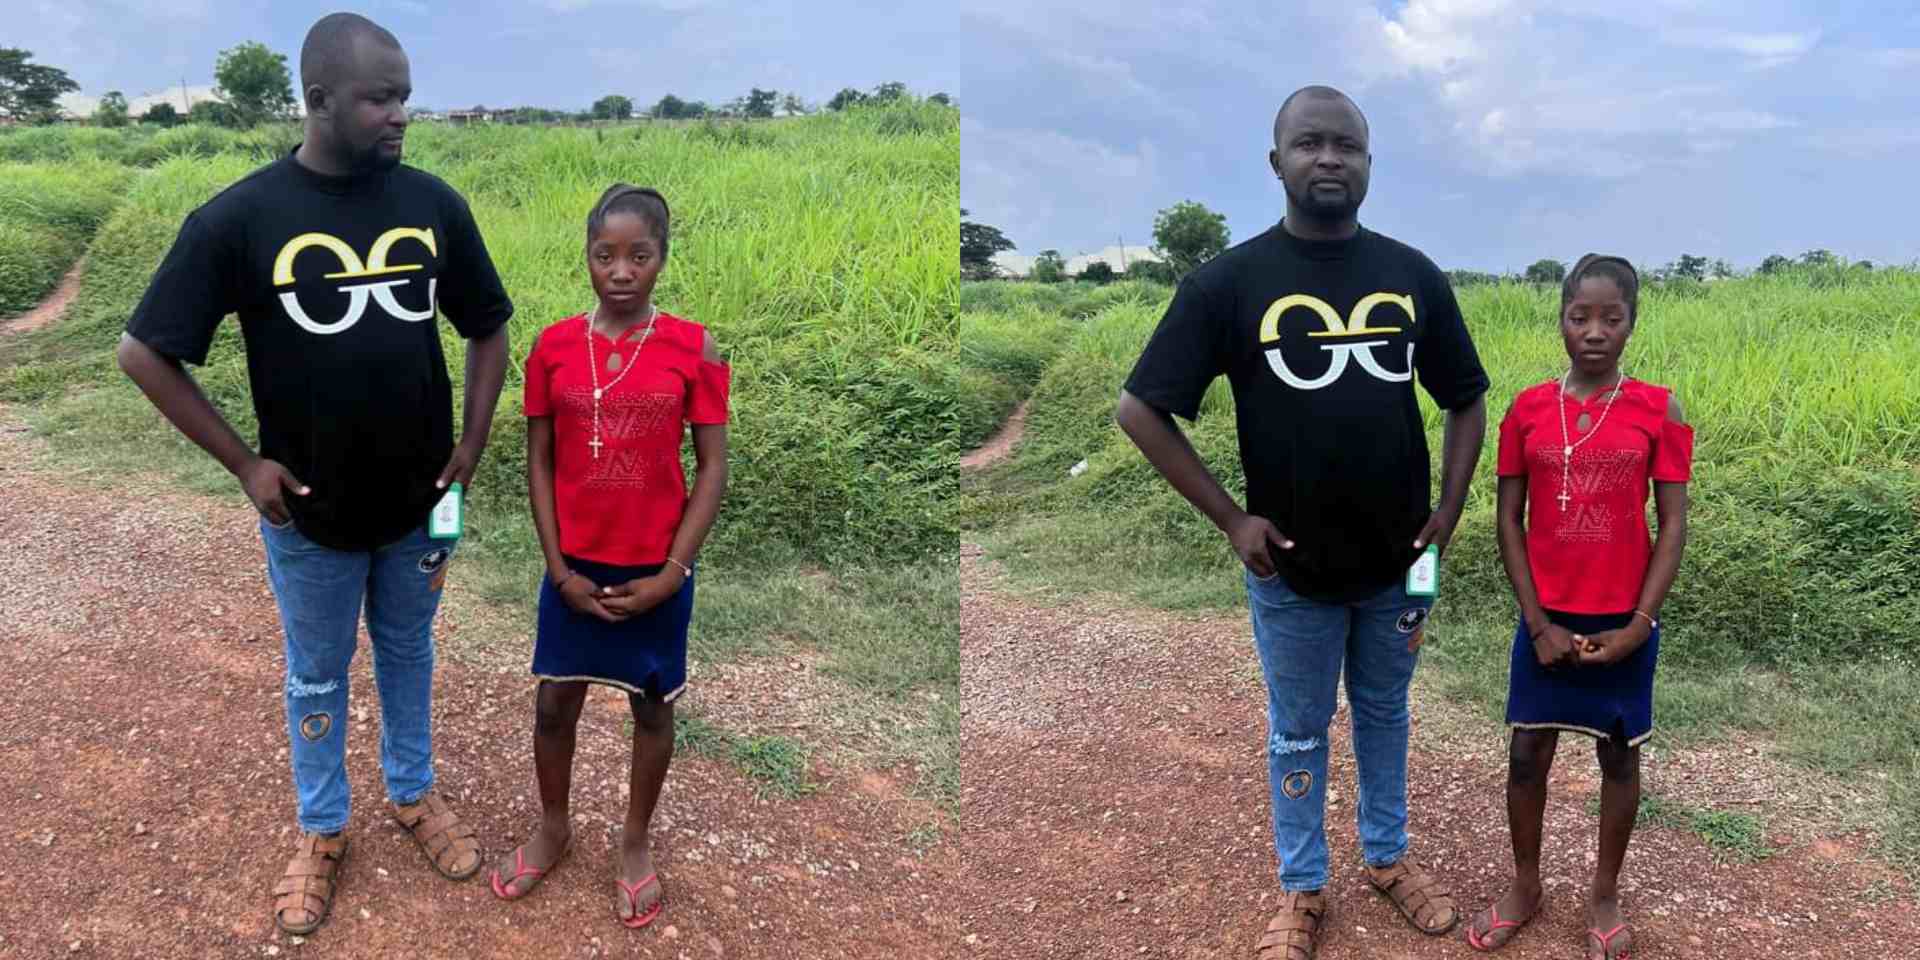 "She's the 3rd wife" - Man raises alarm over 12-year-old girl who is married off to a 50-year-old man in Benue